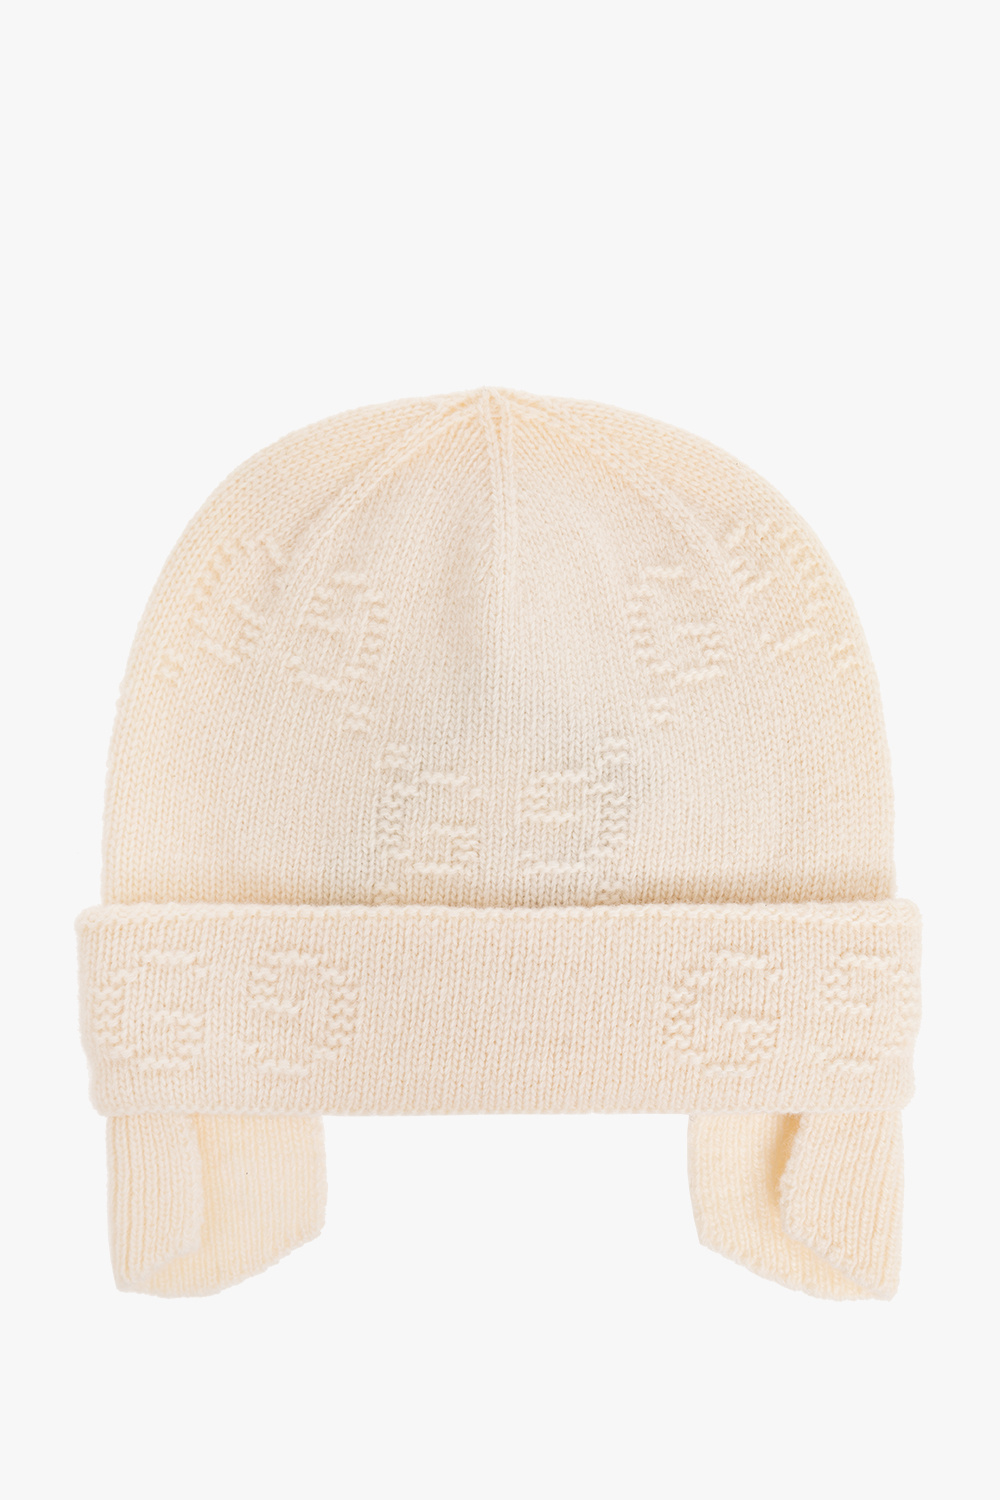 gucci Wow Kids Beanie with earflaps